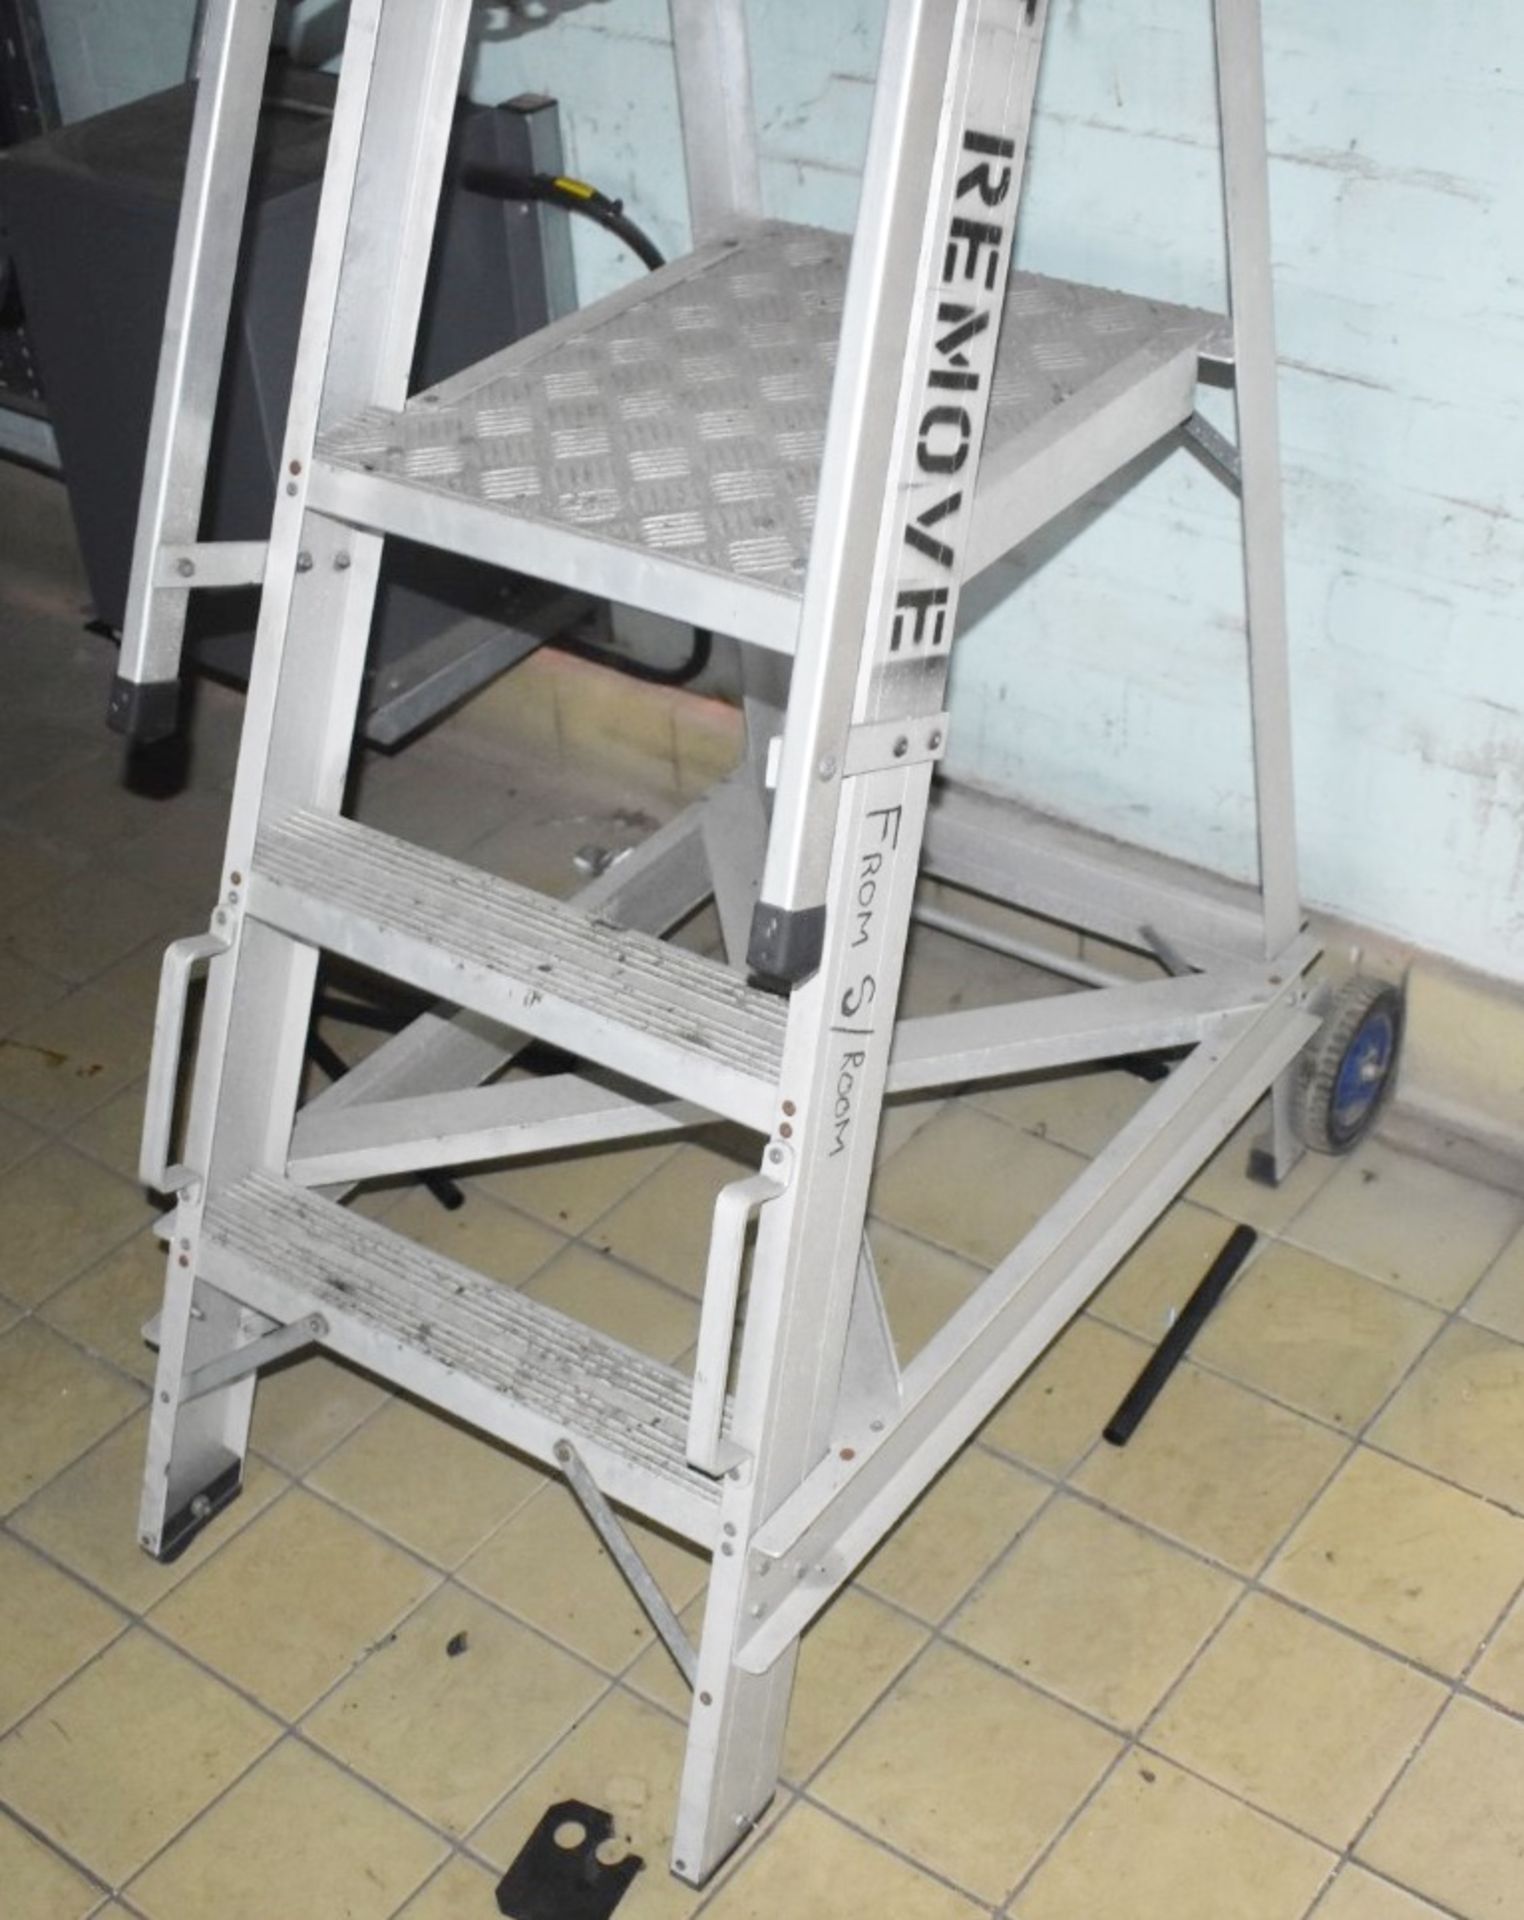 1 x Set of Small Step Ladders With Wheels and Hand Rails - Ref EP173 - CL451 - Location: Scunthorpe, - Image 3 of 3